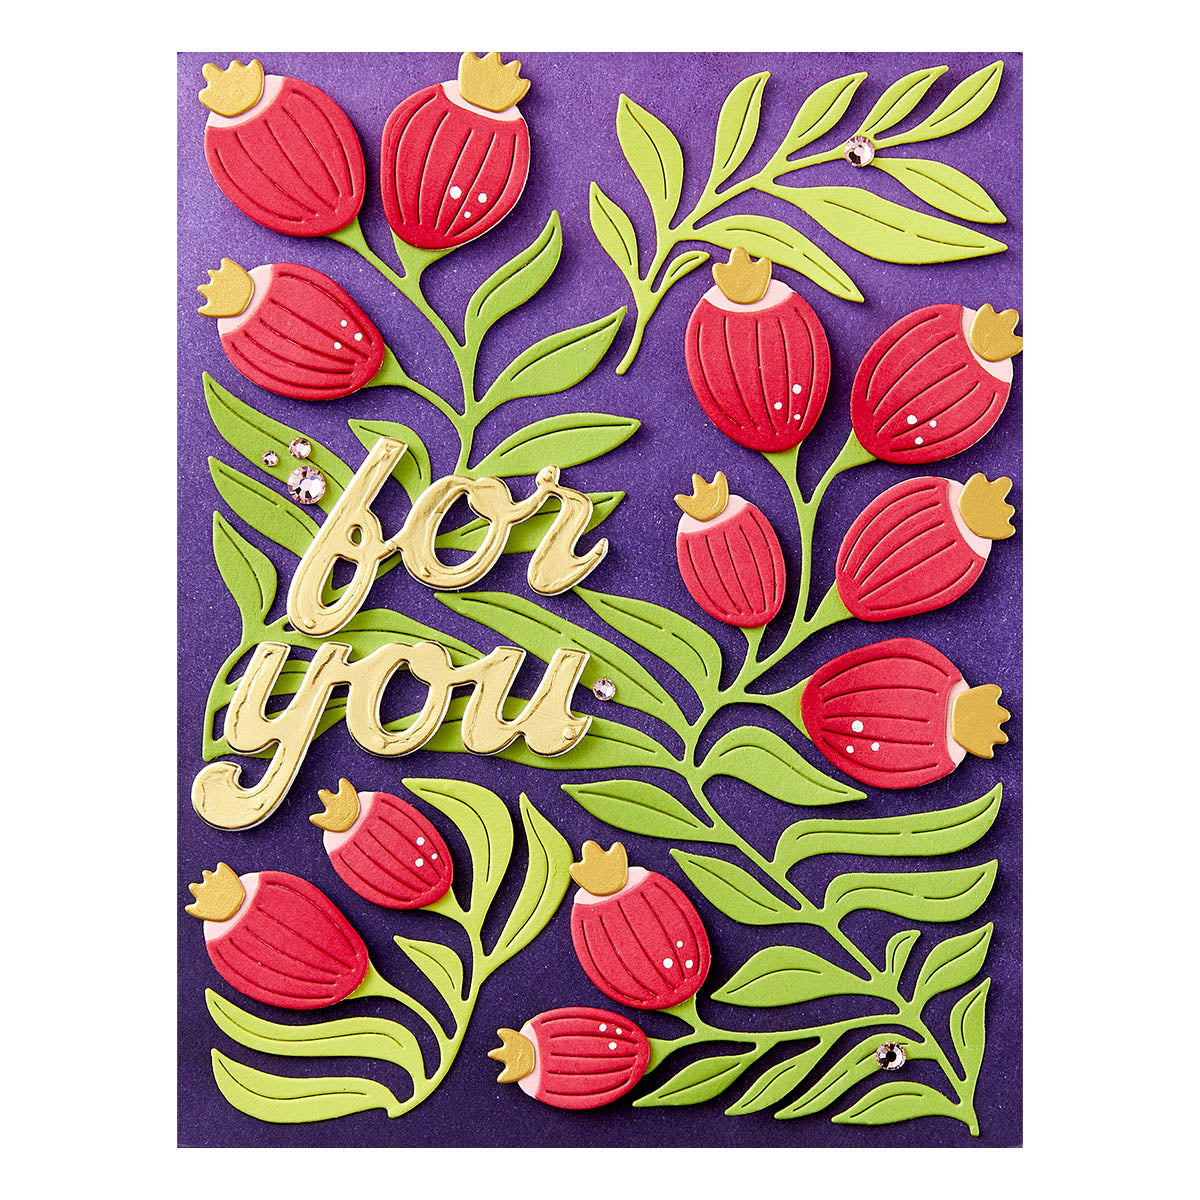 Spellbinders - Fresh Picked Berries Etched Dies from the Fresh Picked Collection